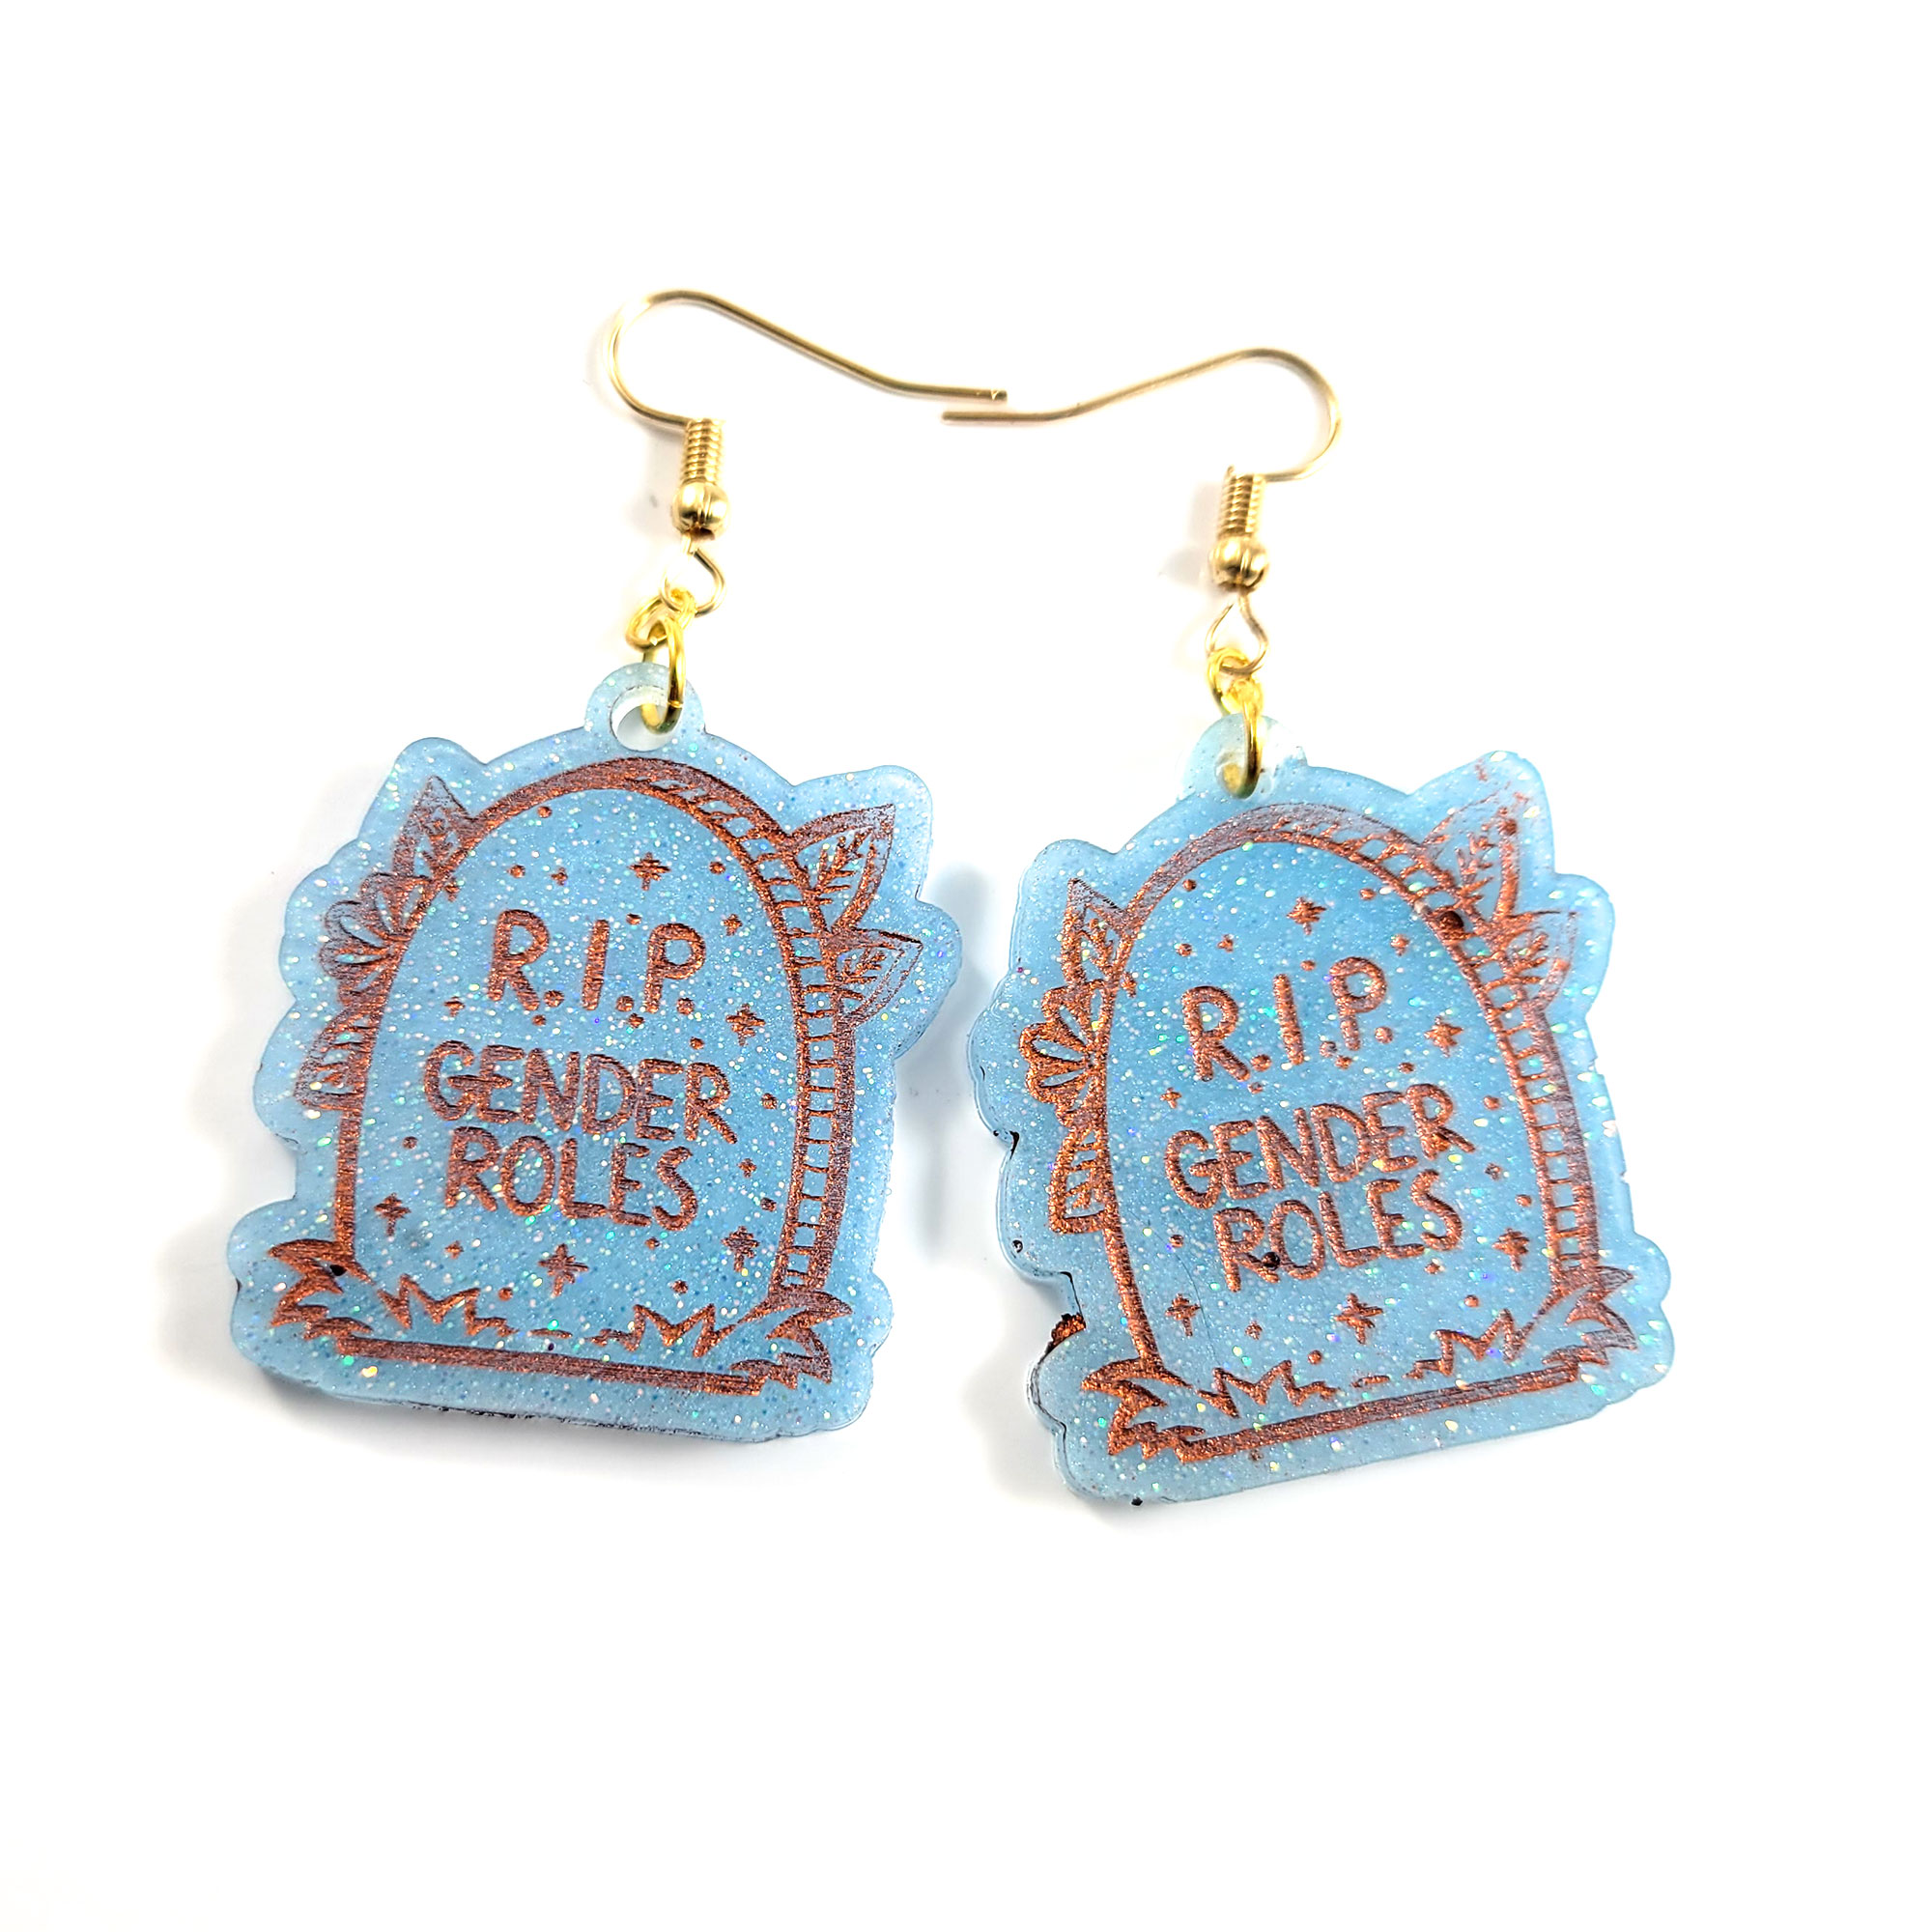 Light Blue and Copper RIP Gender Roles Gravestone Earrings by Wilde Designs